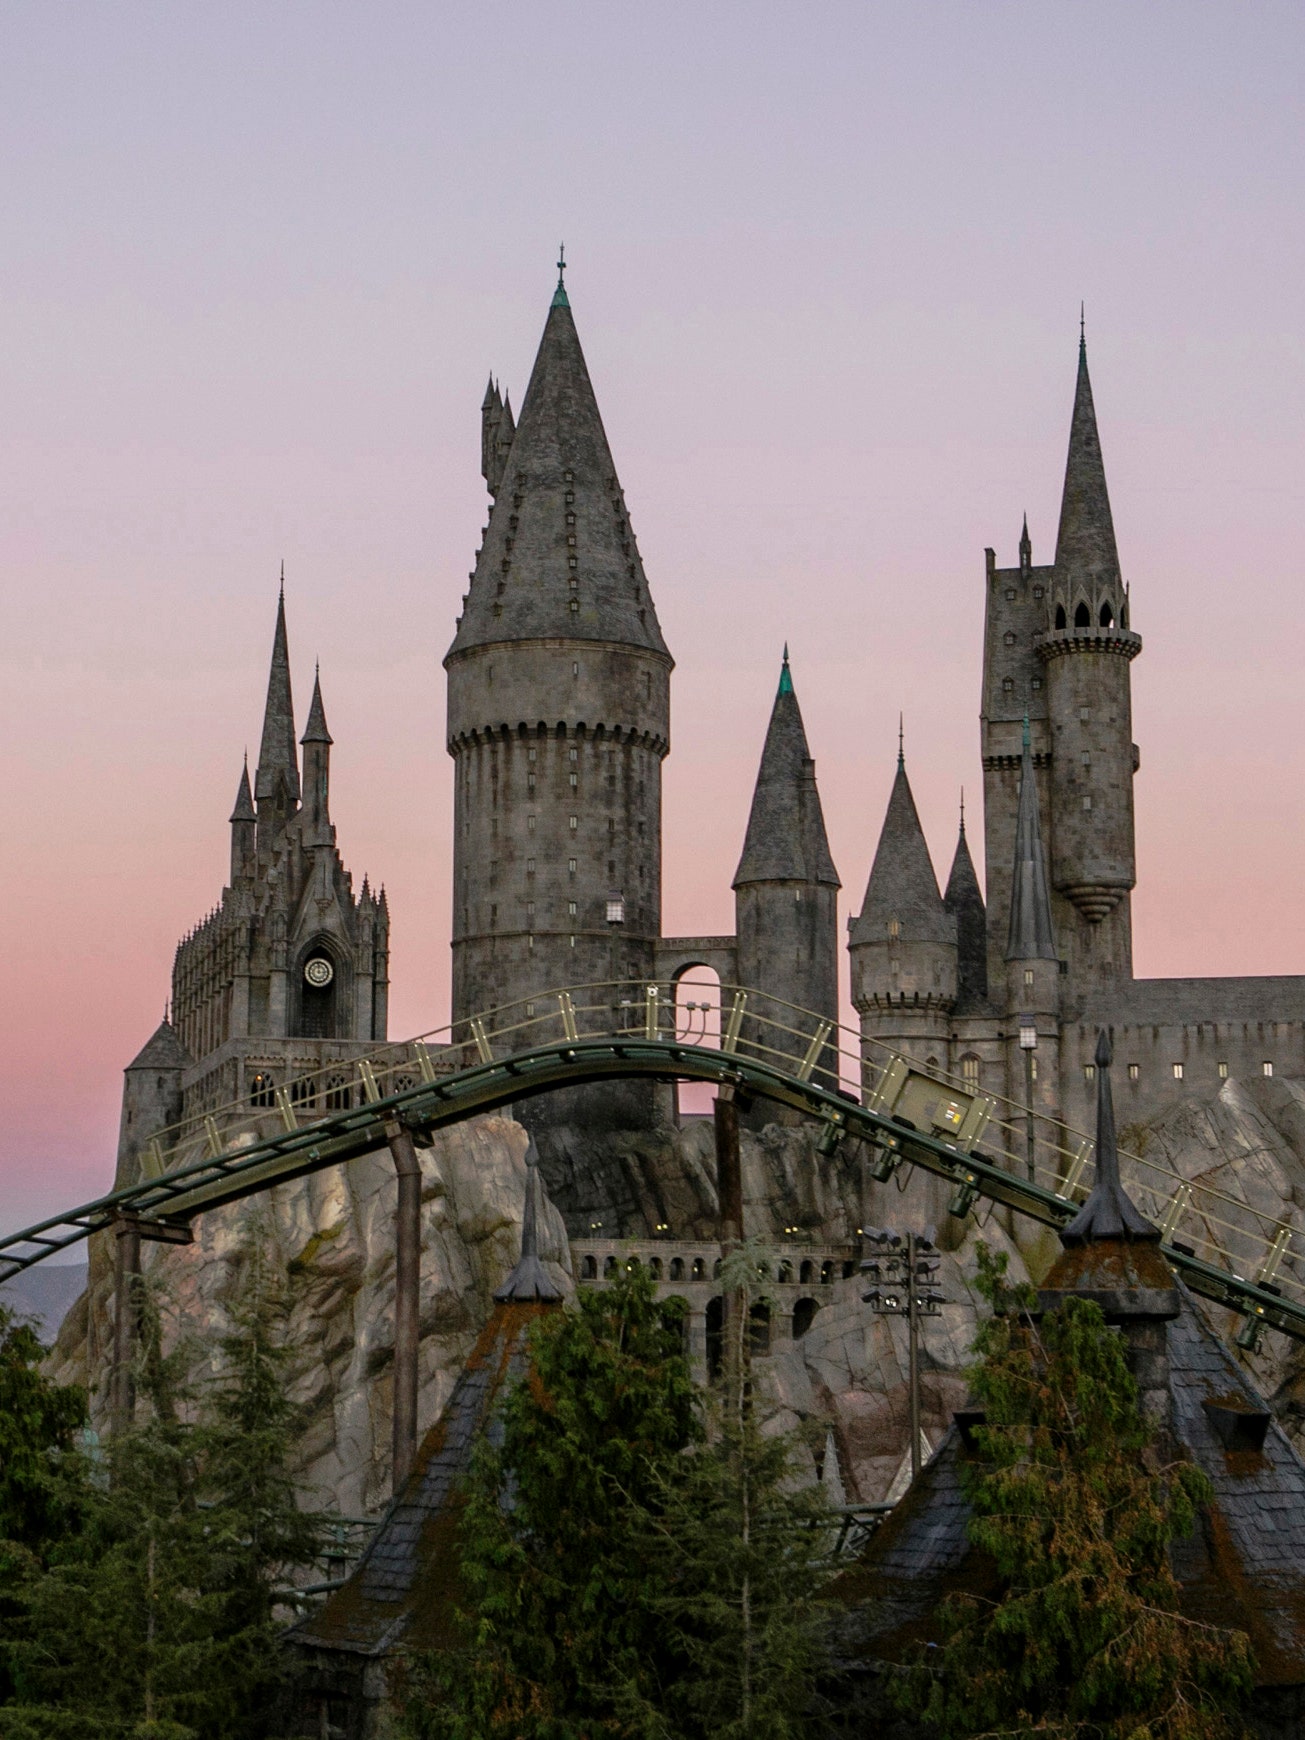 Harry Potter Flying Car Wallpapers